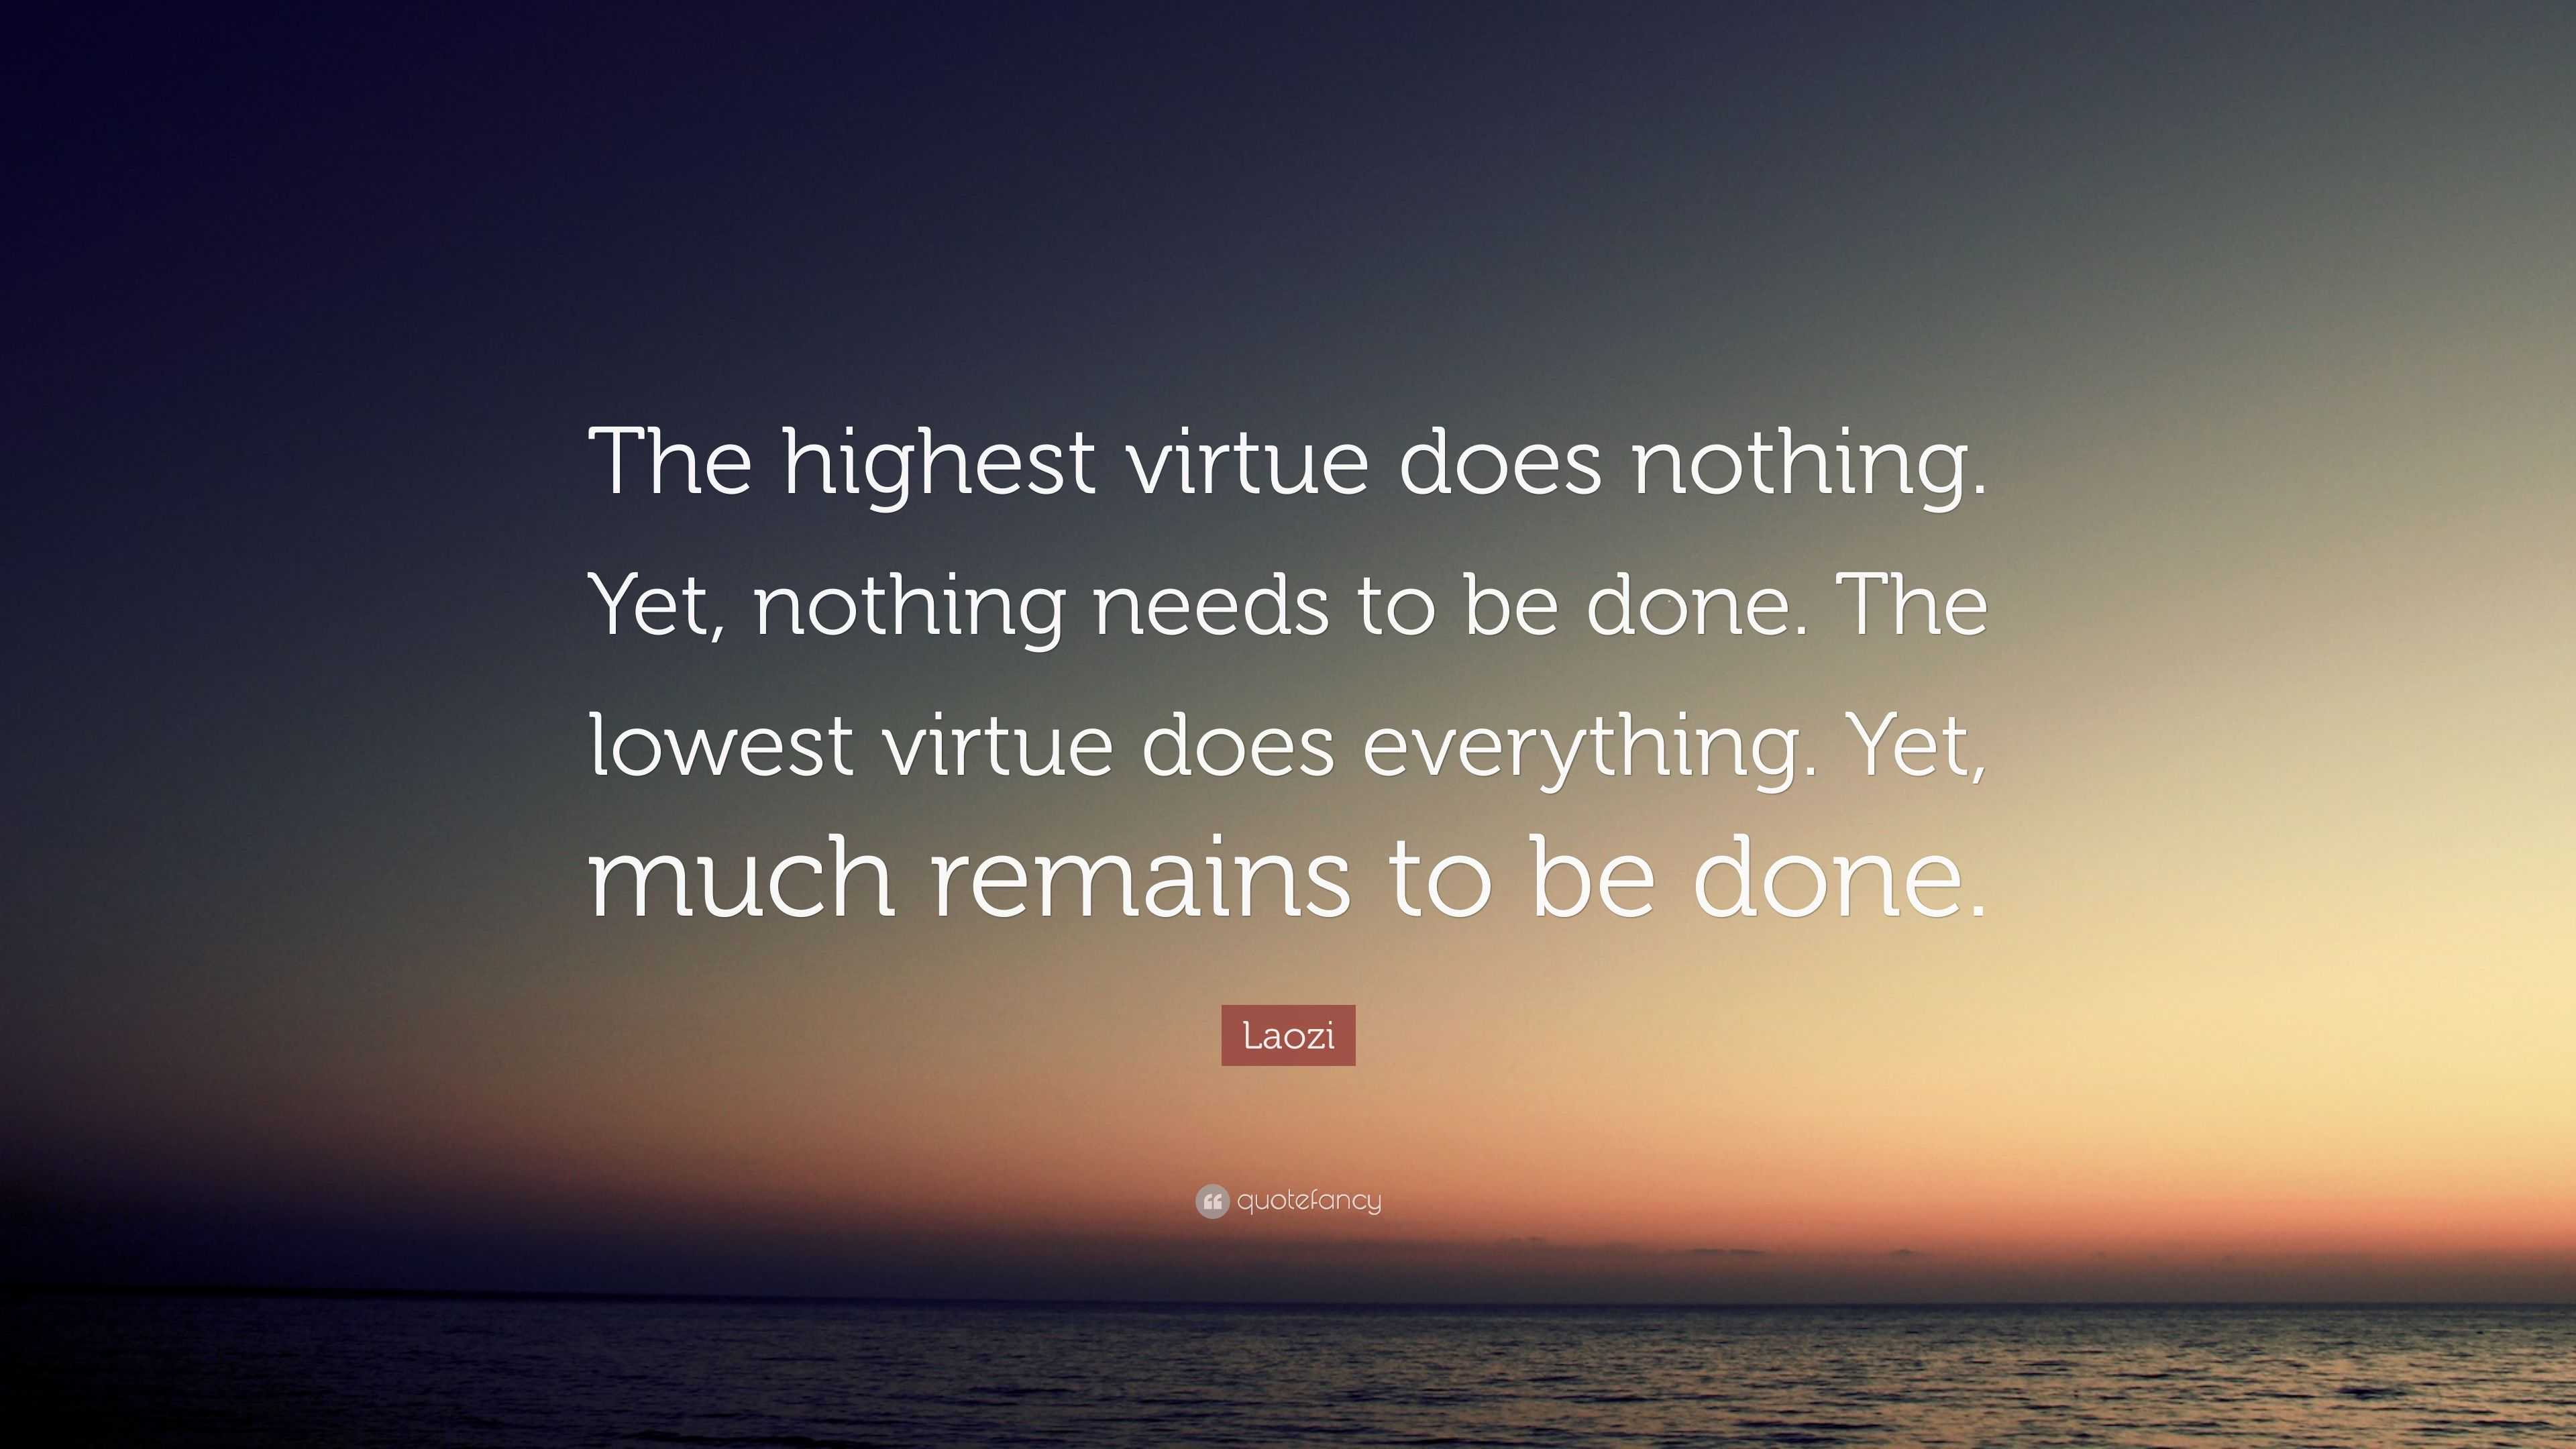 Laozi Quote: “The highest virtue does nothing. Yet, nothing needs to be ...